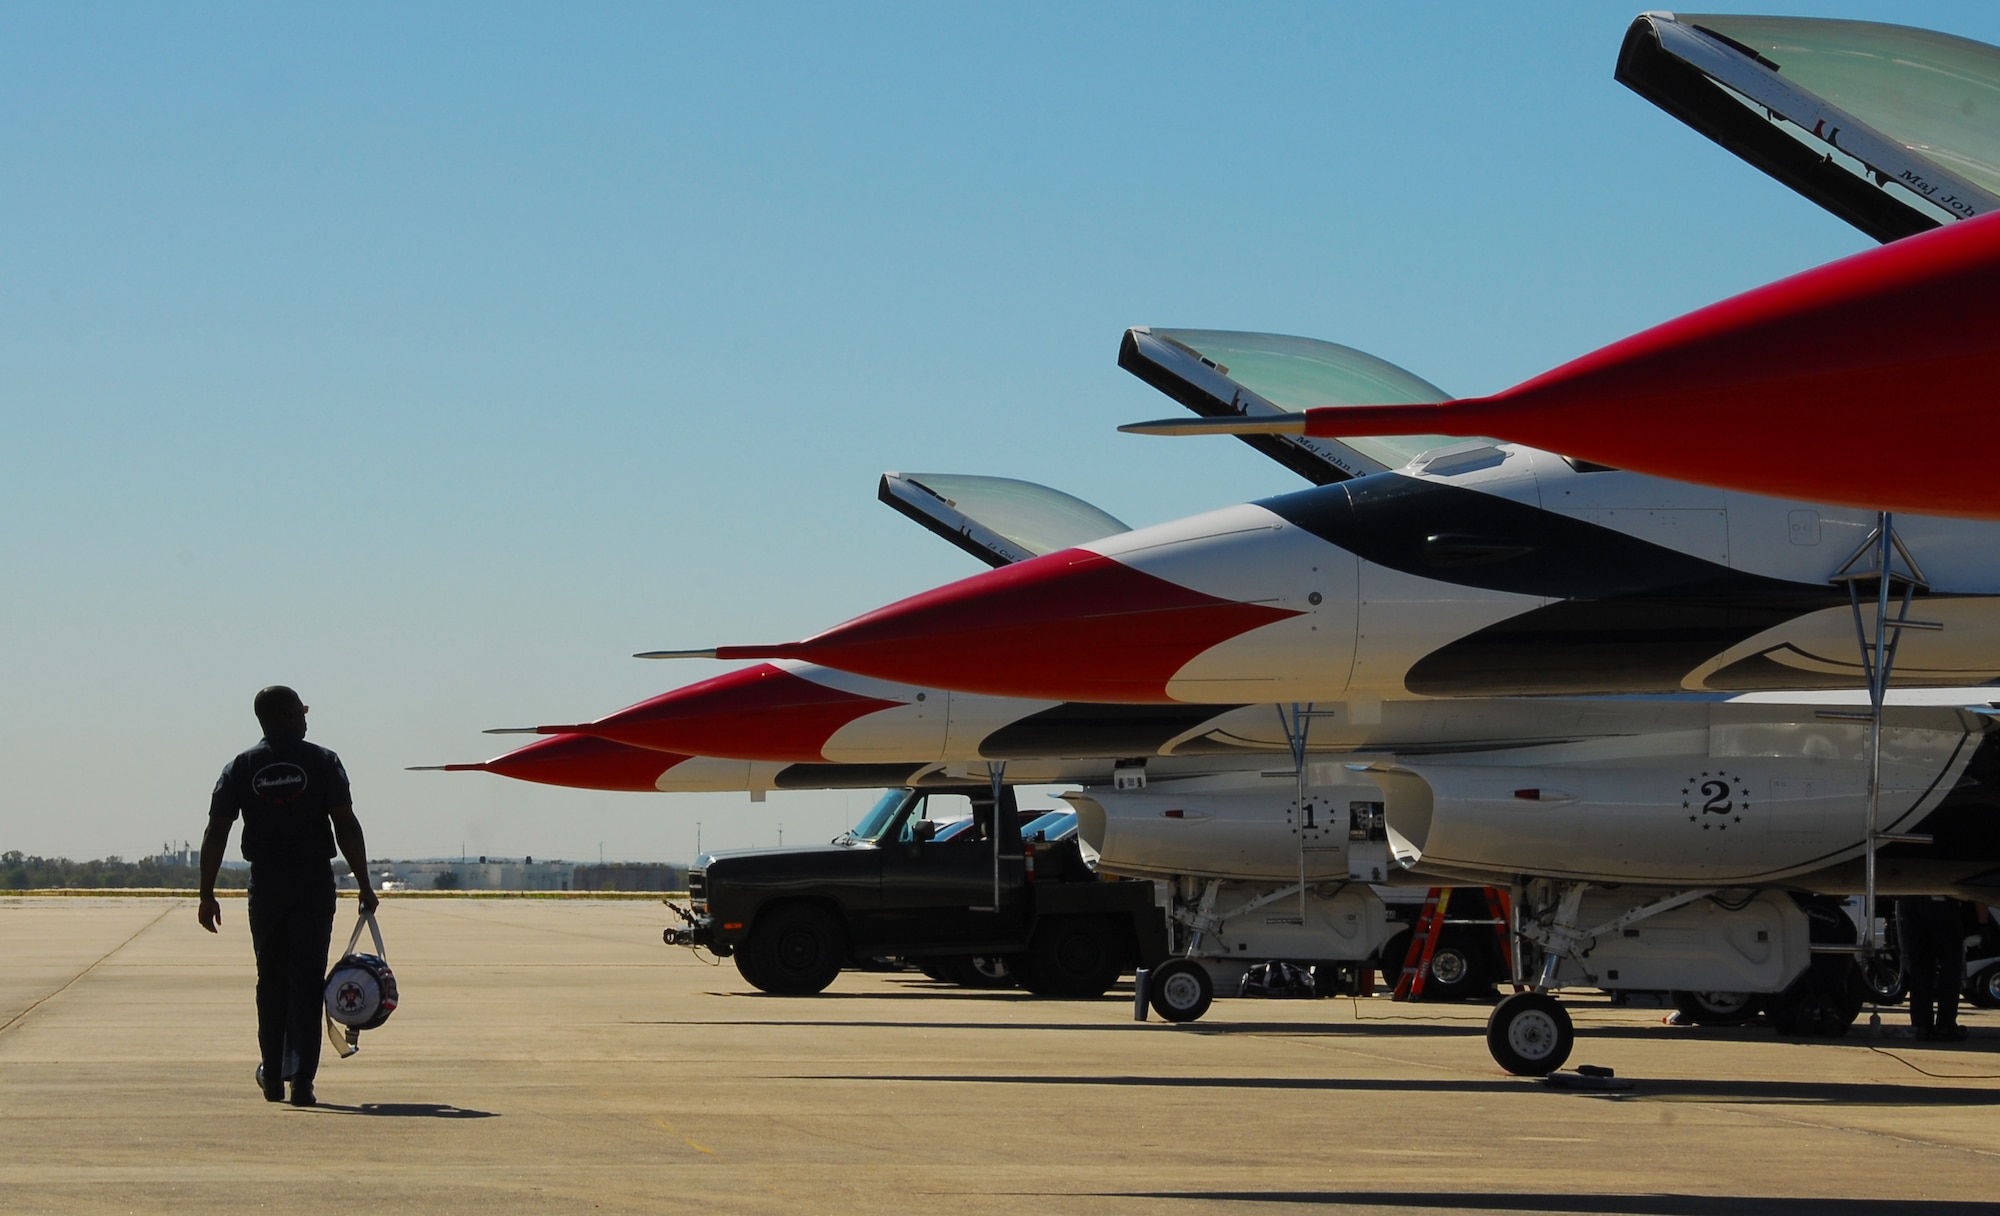 Air Force Thunderbird maintainers finish pre-inspections on the air demonstration team's F-16 Fighting Falcons Nov. 5, 2010, at Lackland Air Force Base, Texas. The Thunderbirds performed an air show Nov. 6 and 7 at Lackland AFB's AirFest 2010. (U.S. Air Force photo/Staff Sgt. Jamie Powell)